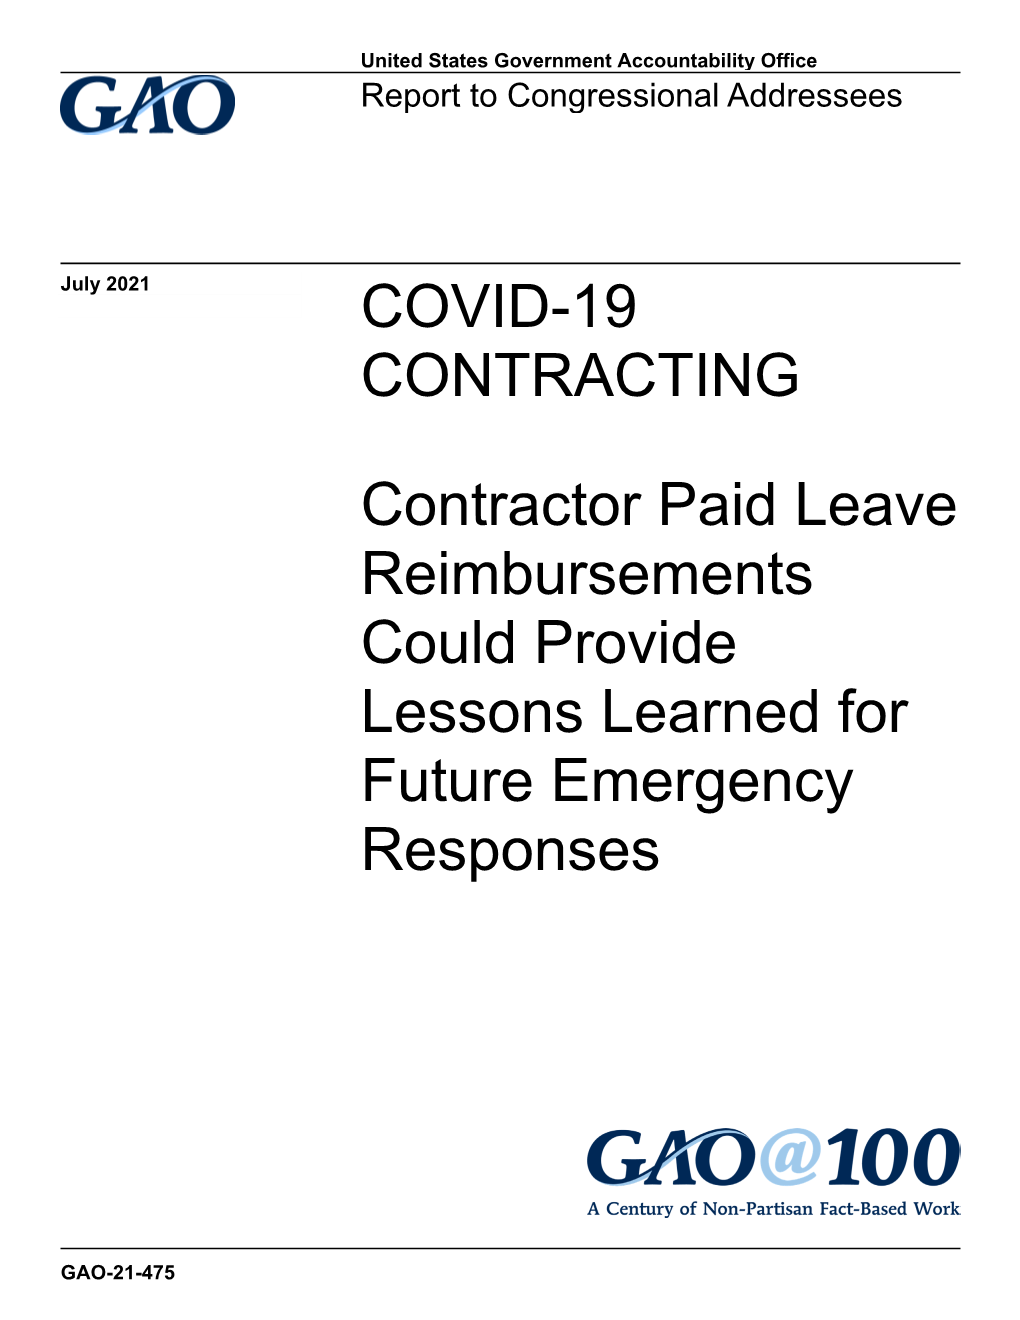 GAO-21-475, COVID-19 CONTRACTING: Contractor Paid Leave Reimbursements Could Provide Lessons Learned for Future Emergency Respon